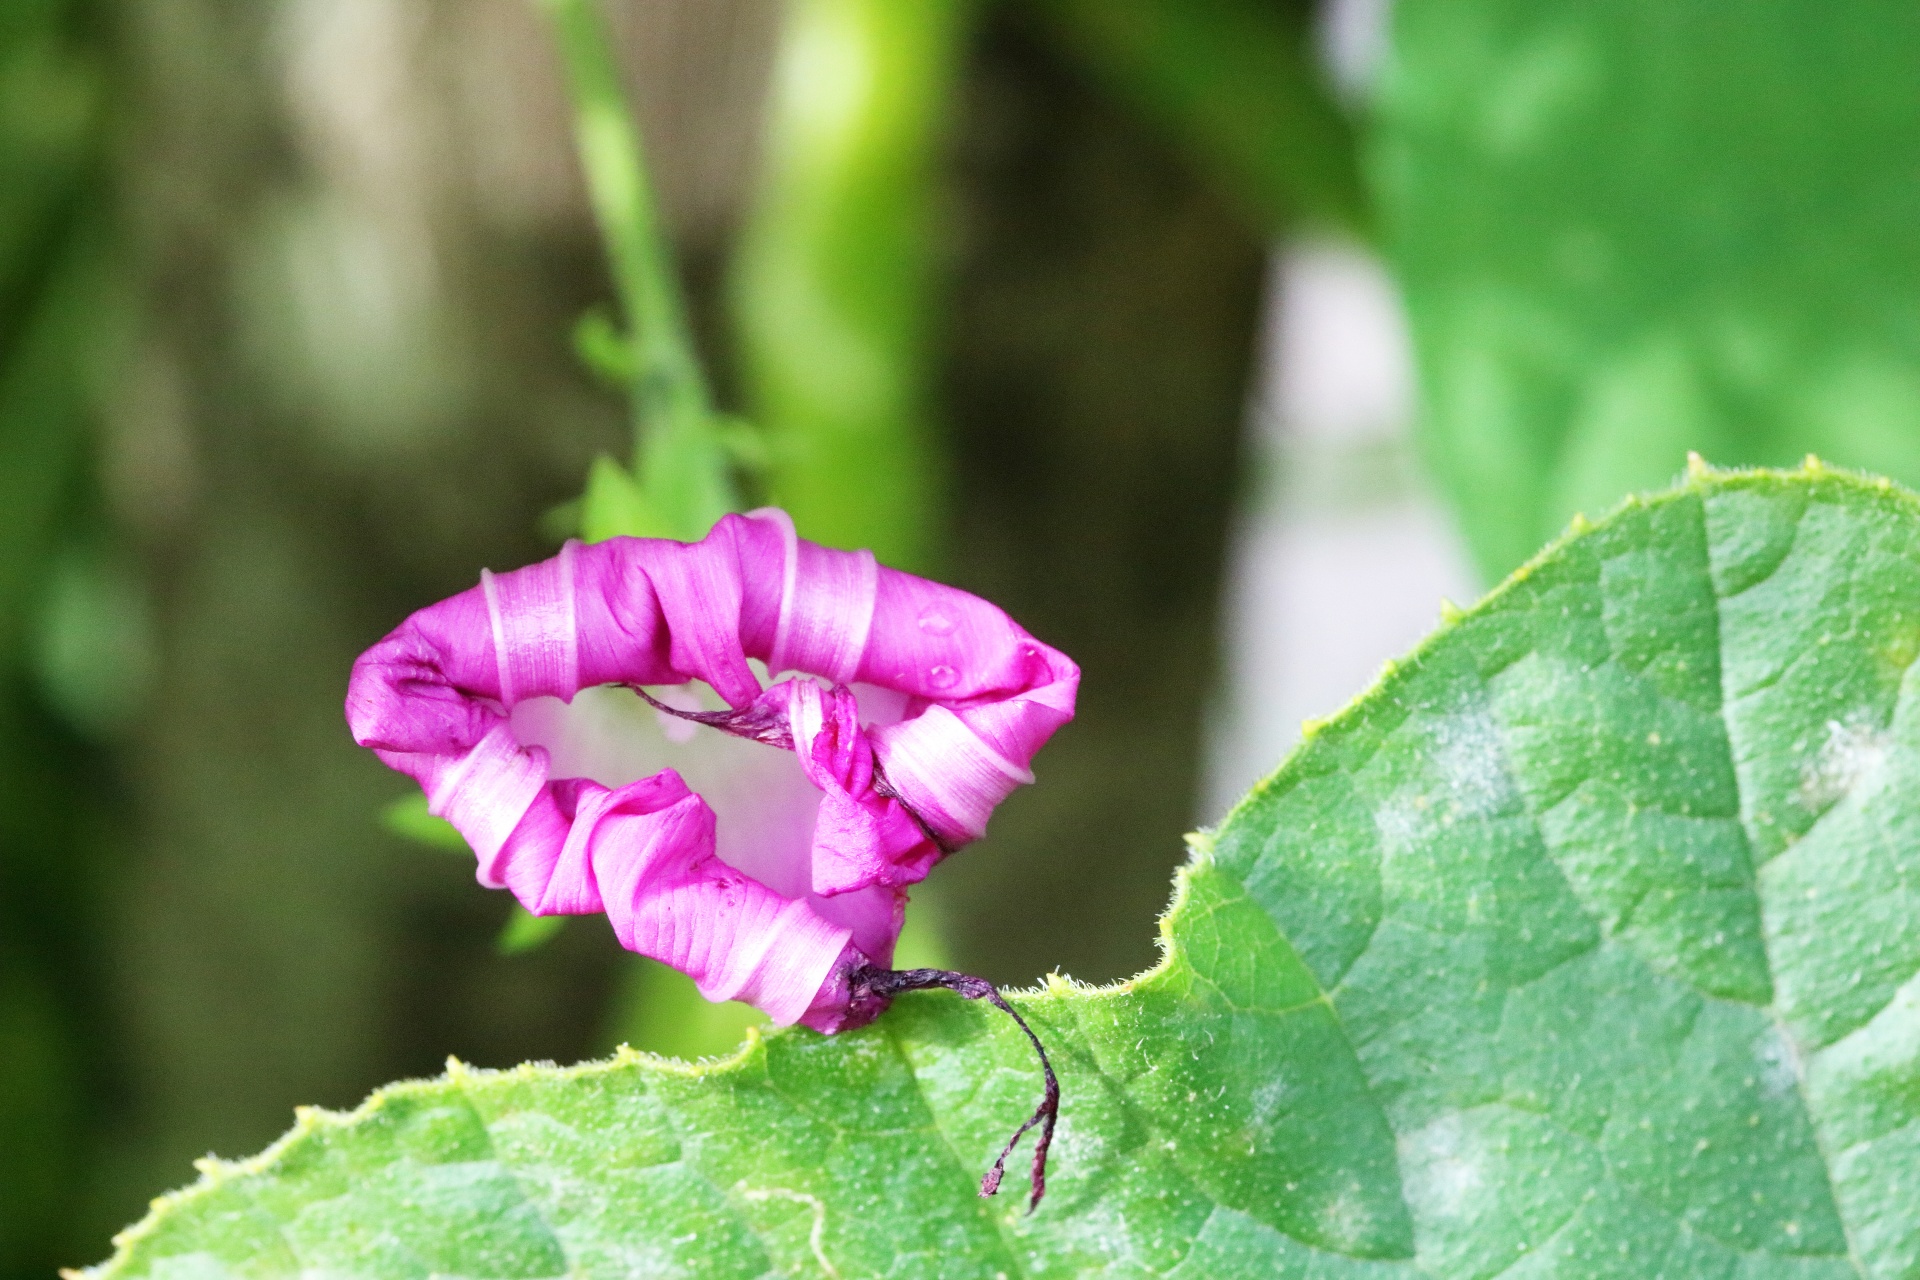 unfurled petals of a pink morning glory flower